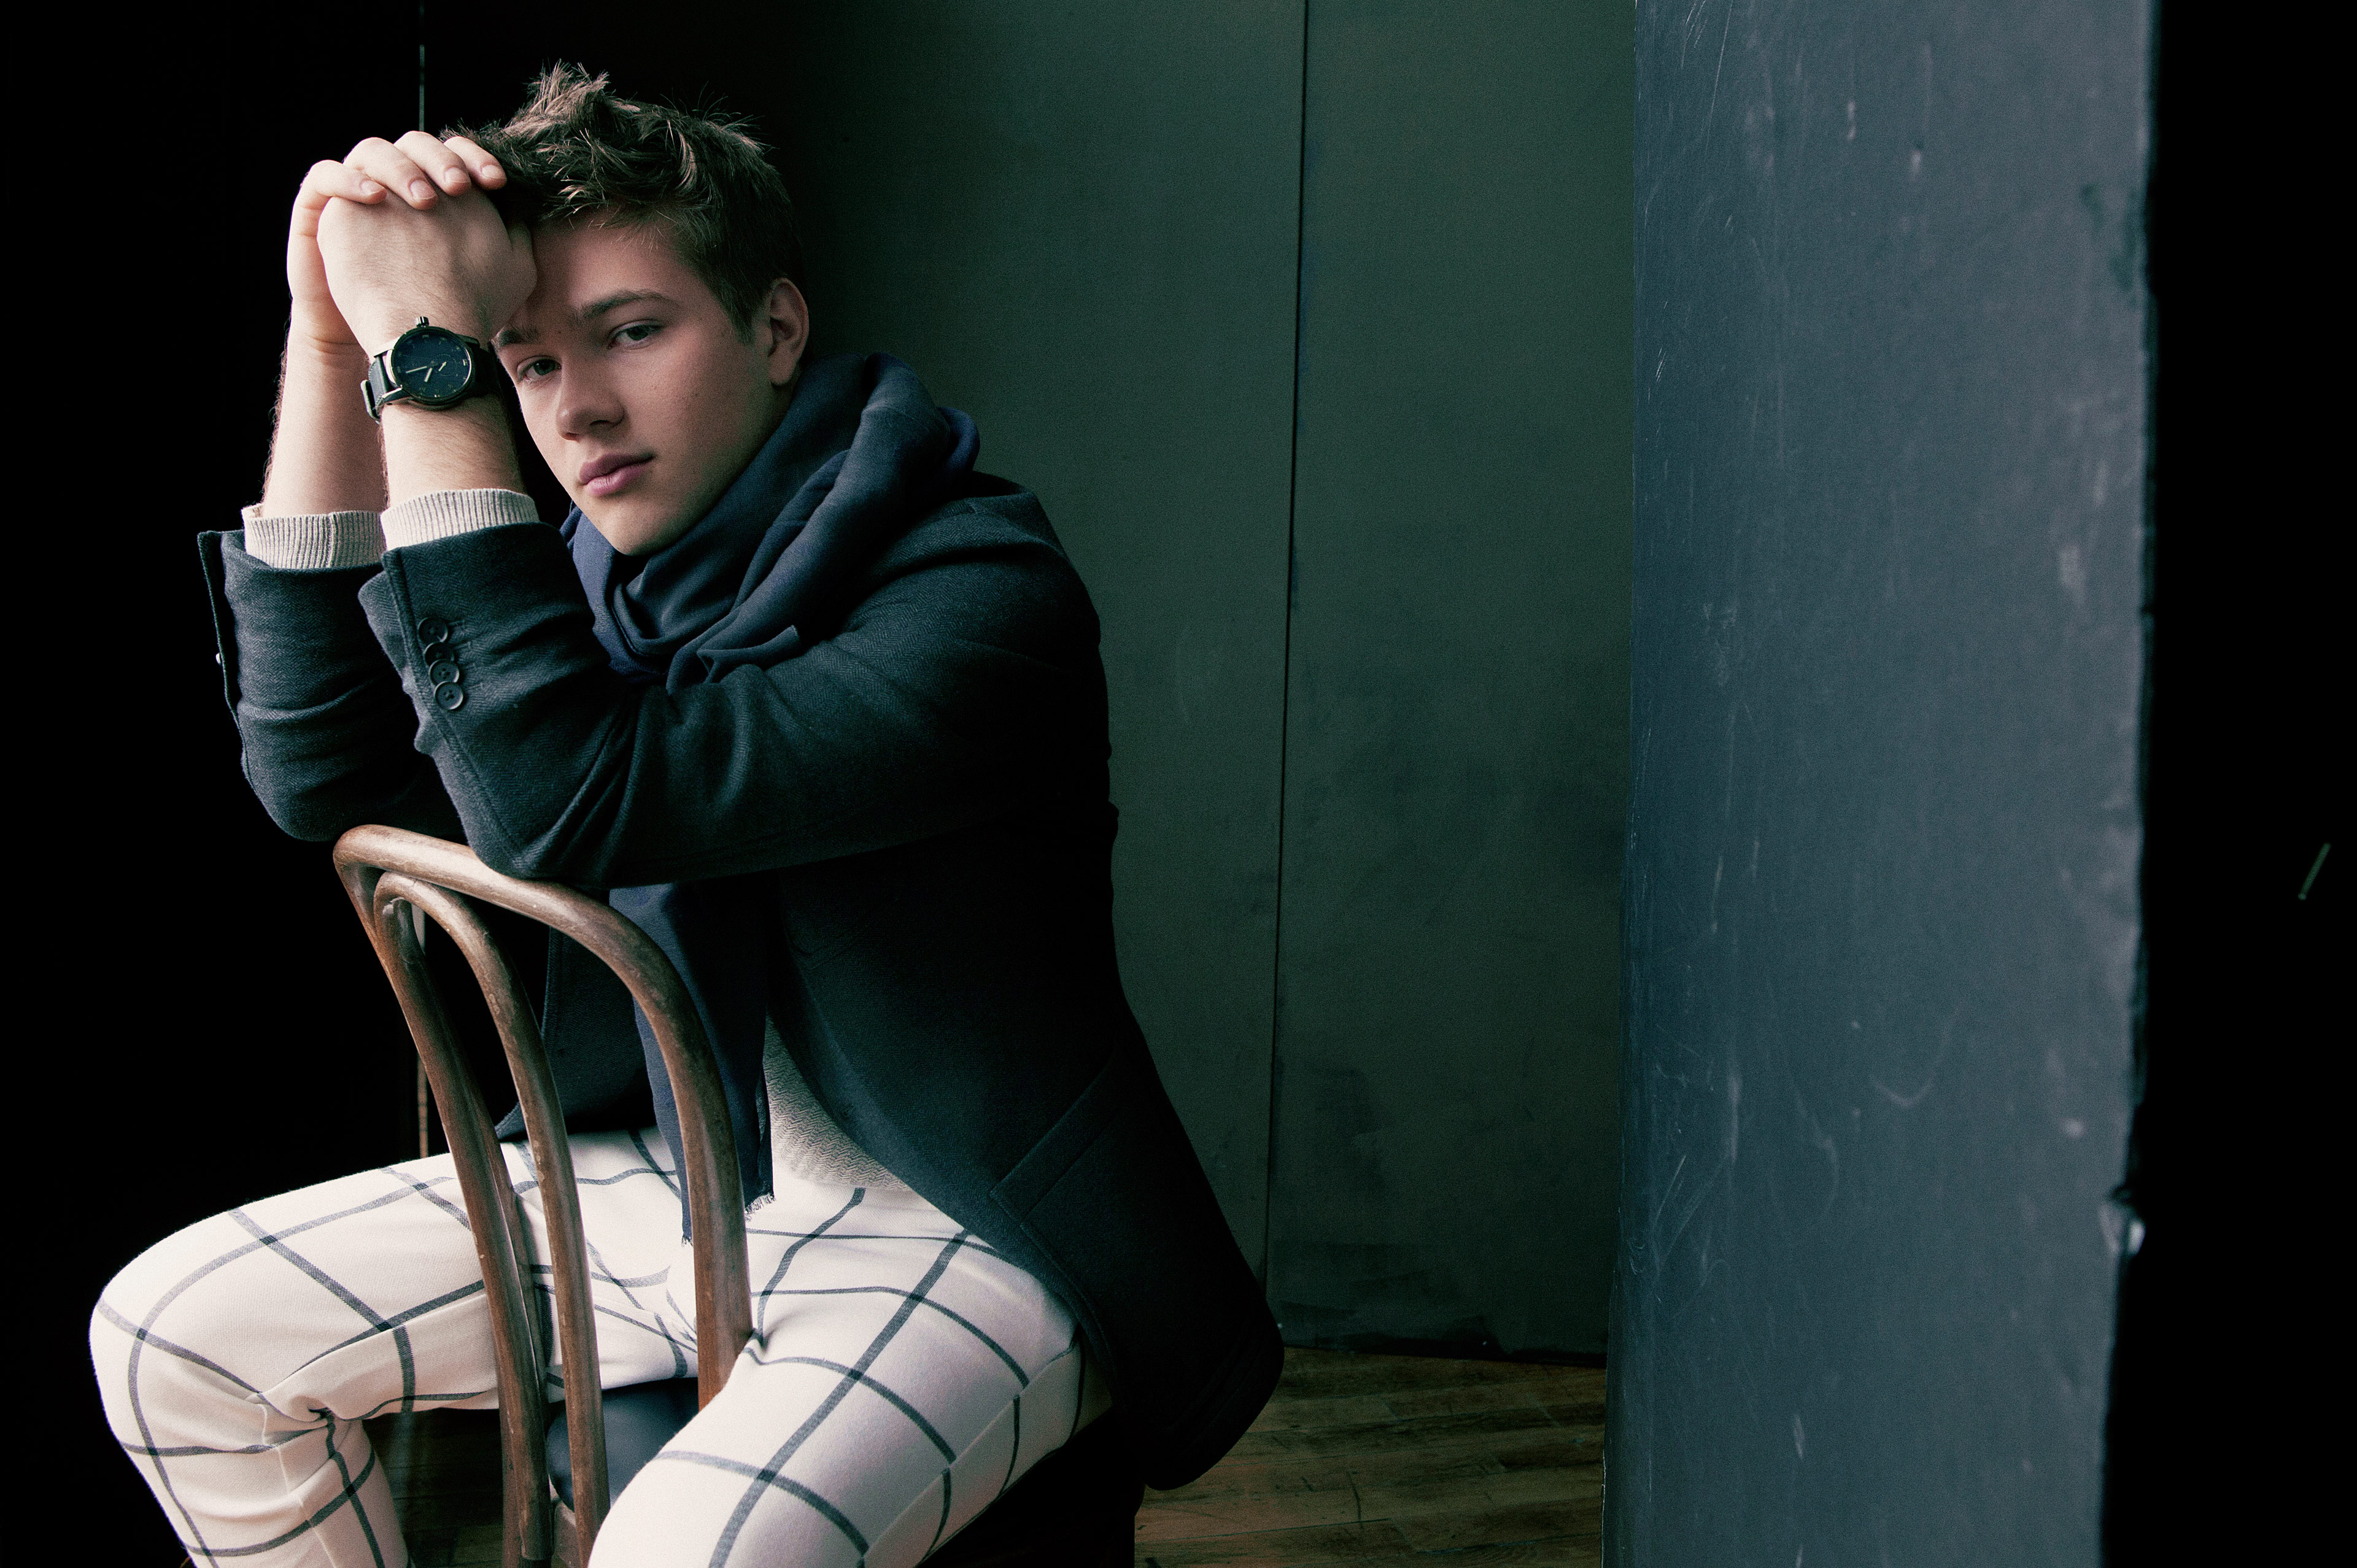 ABC’s "American Crime" finds its brave outsider in Connor Jessup.